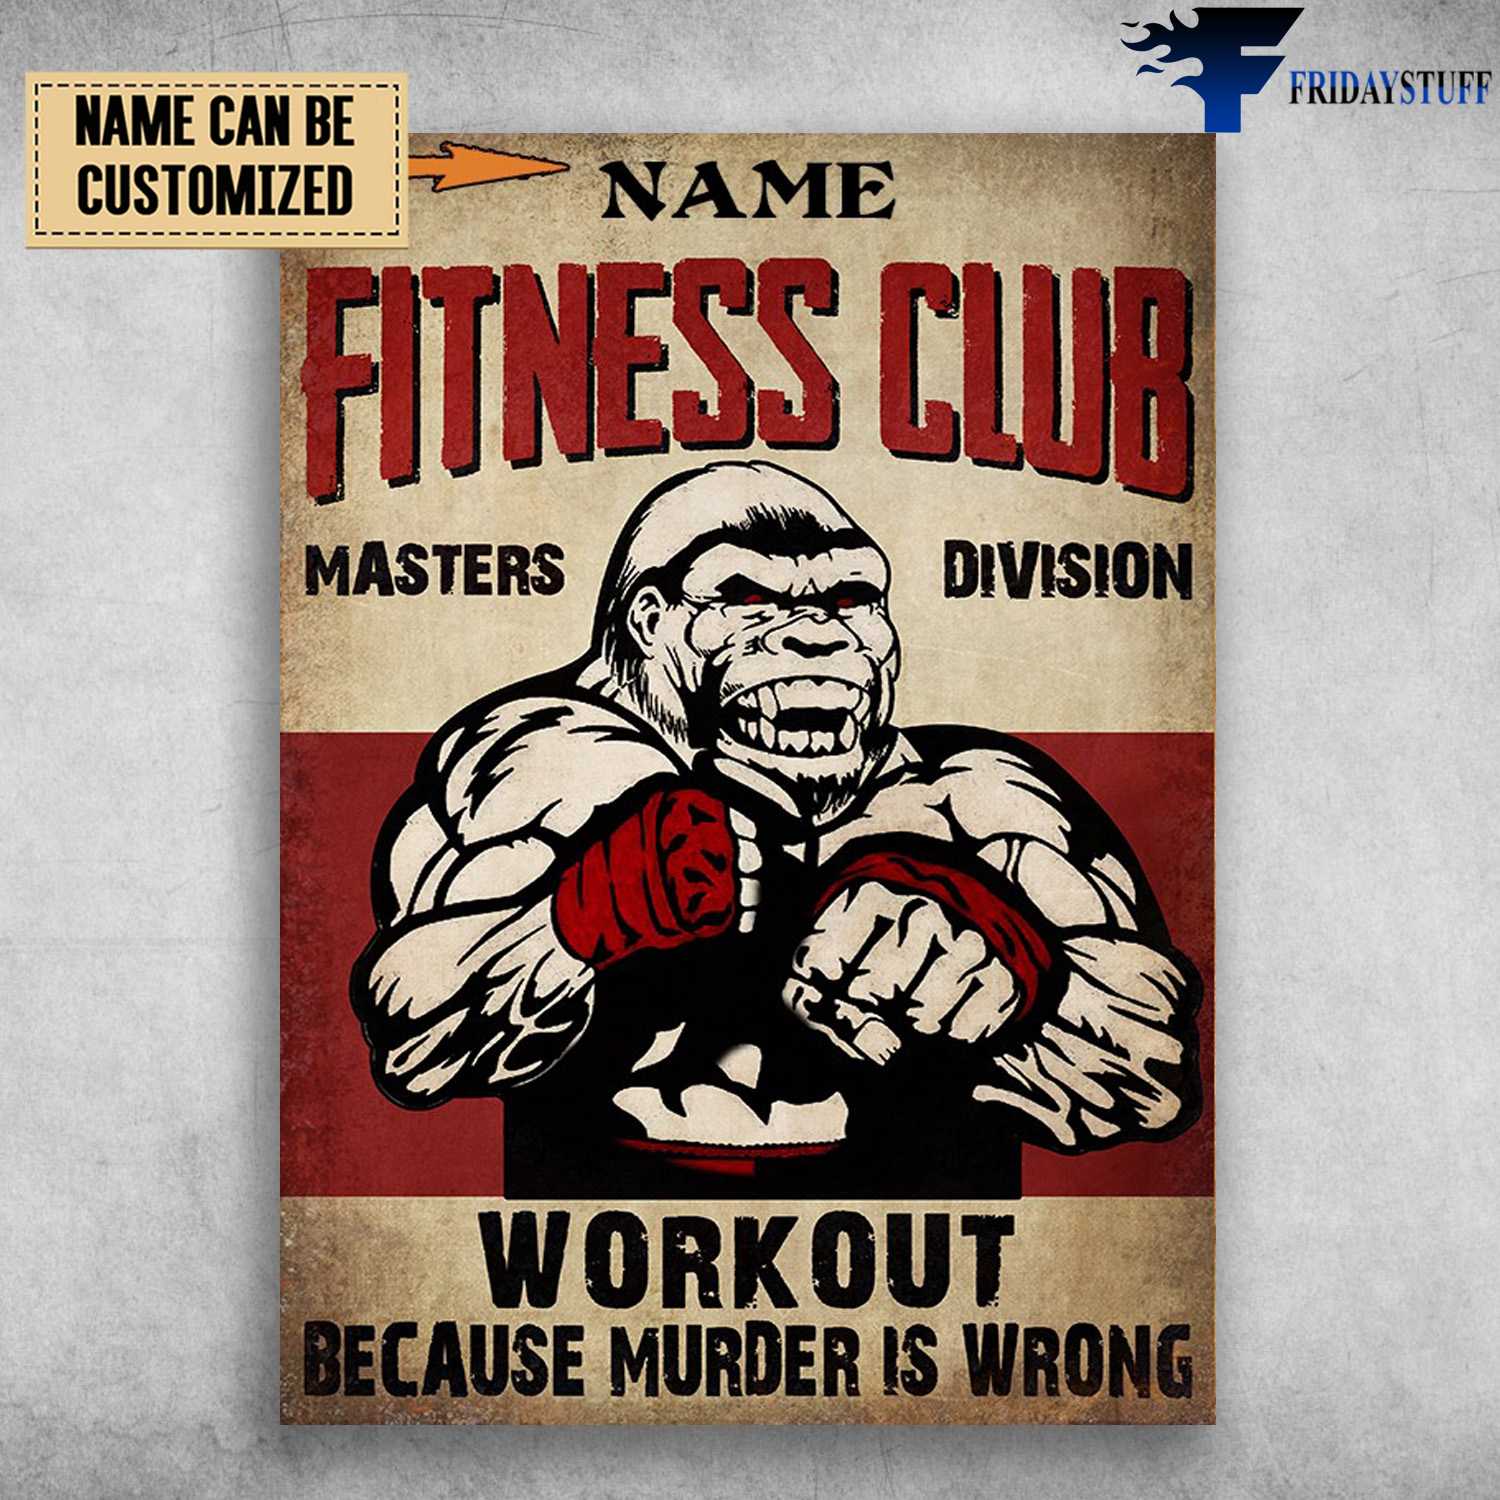 Kingkong Fitnesss, Fitness Club, Masters Division, Workout Because Murder is Wrong